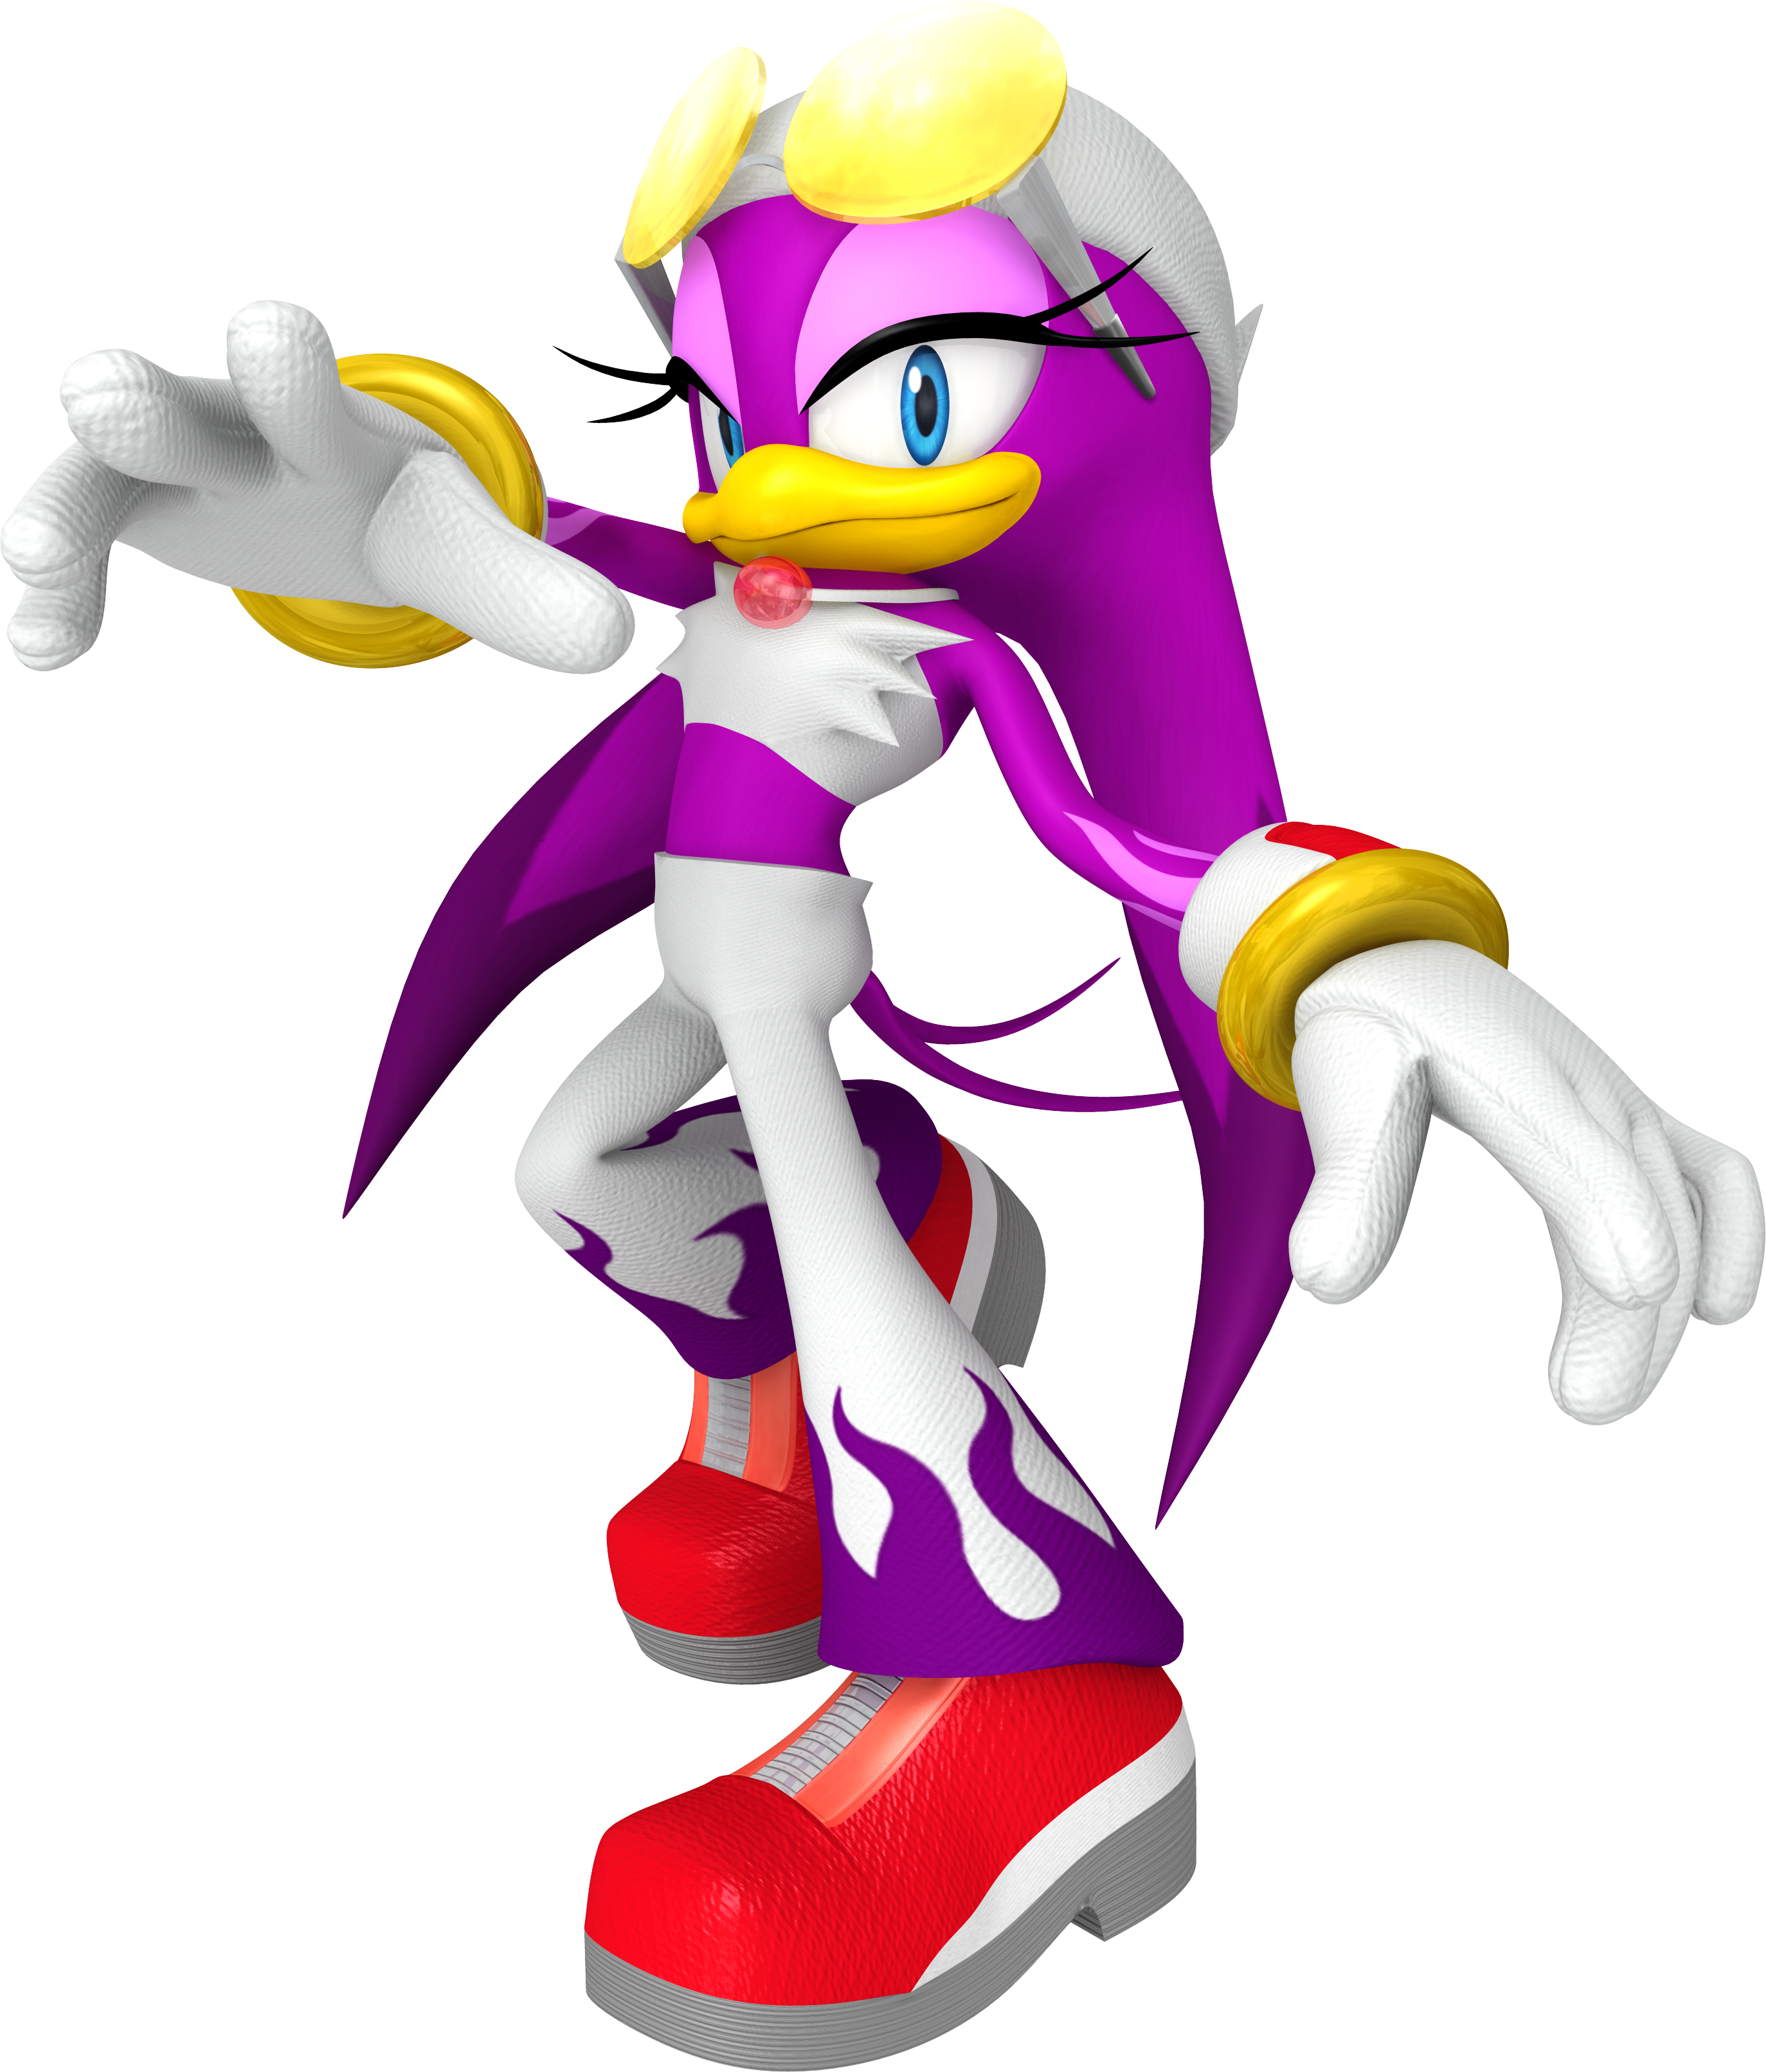 Waves clipart giant wave. The swallow sonic news